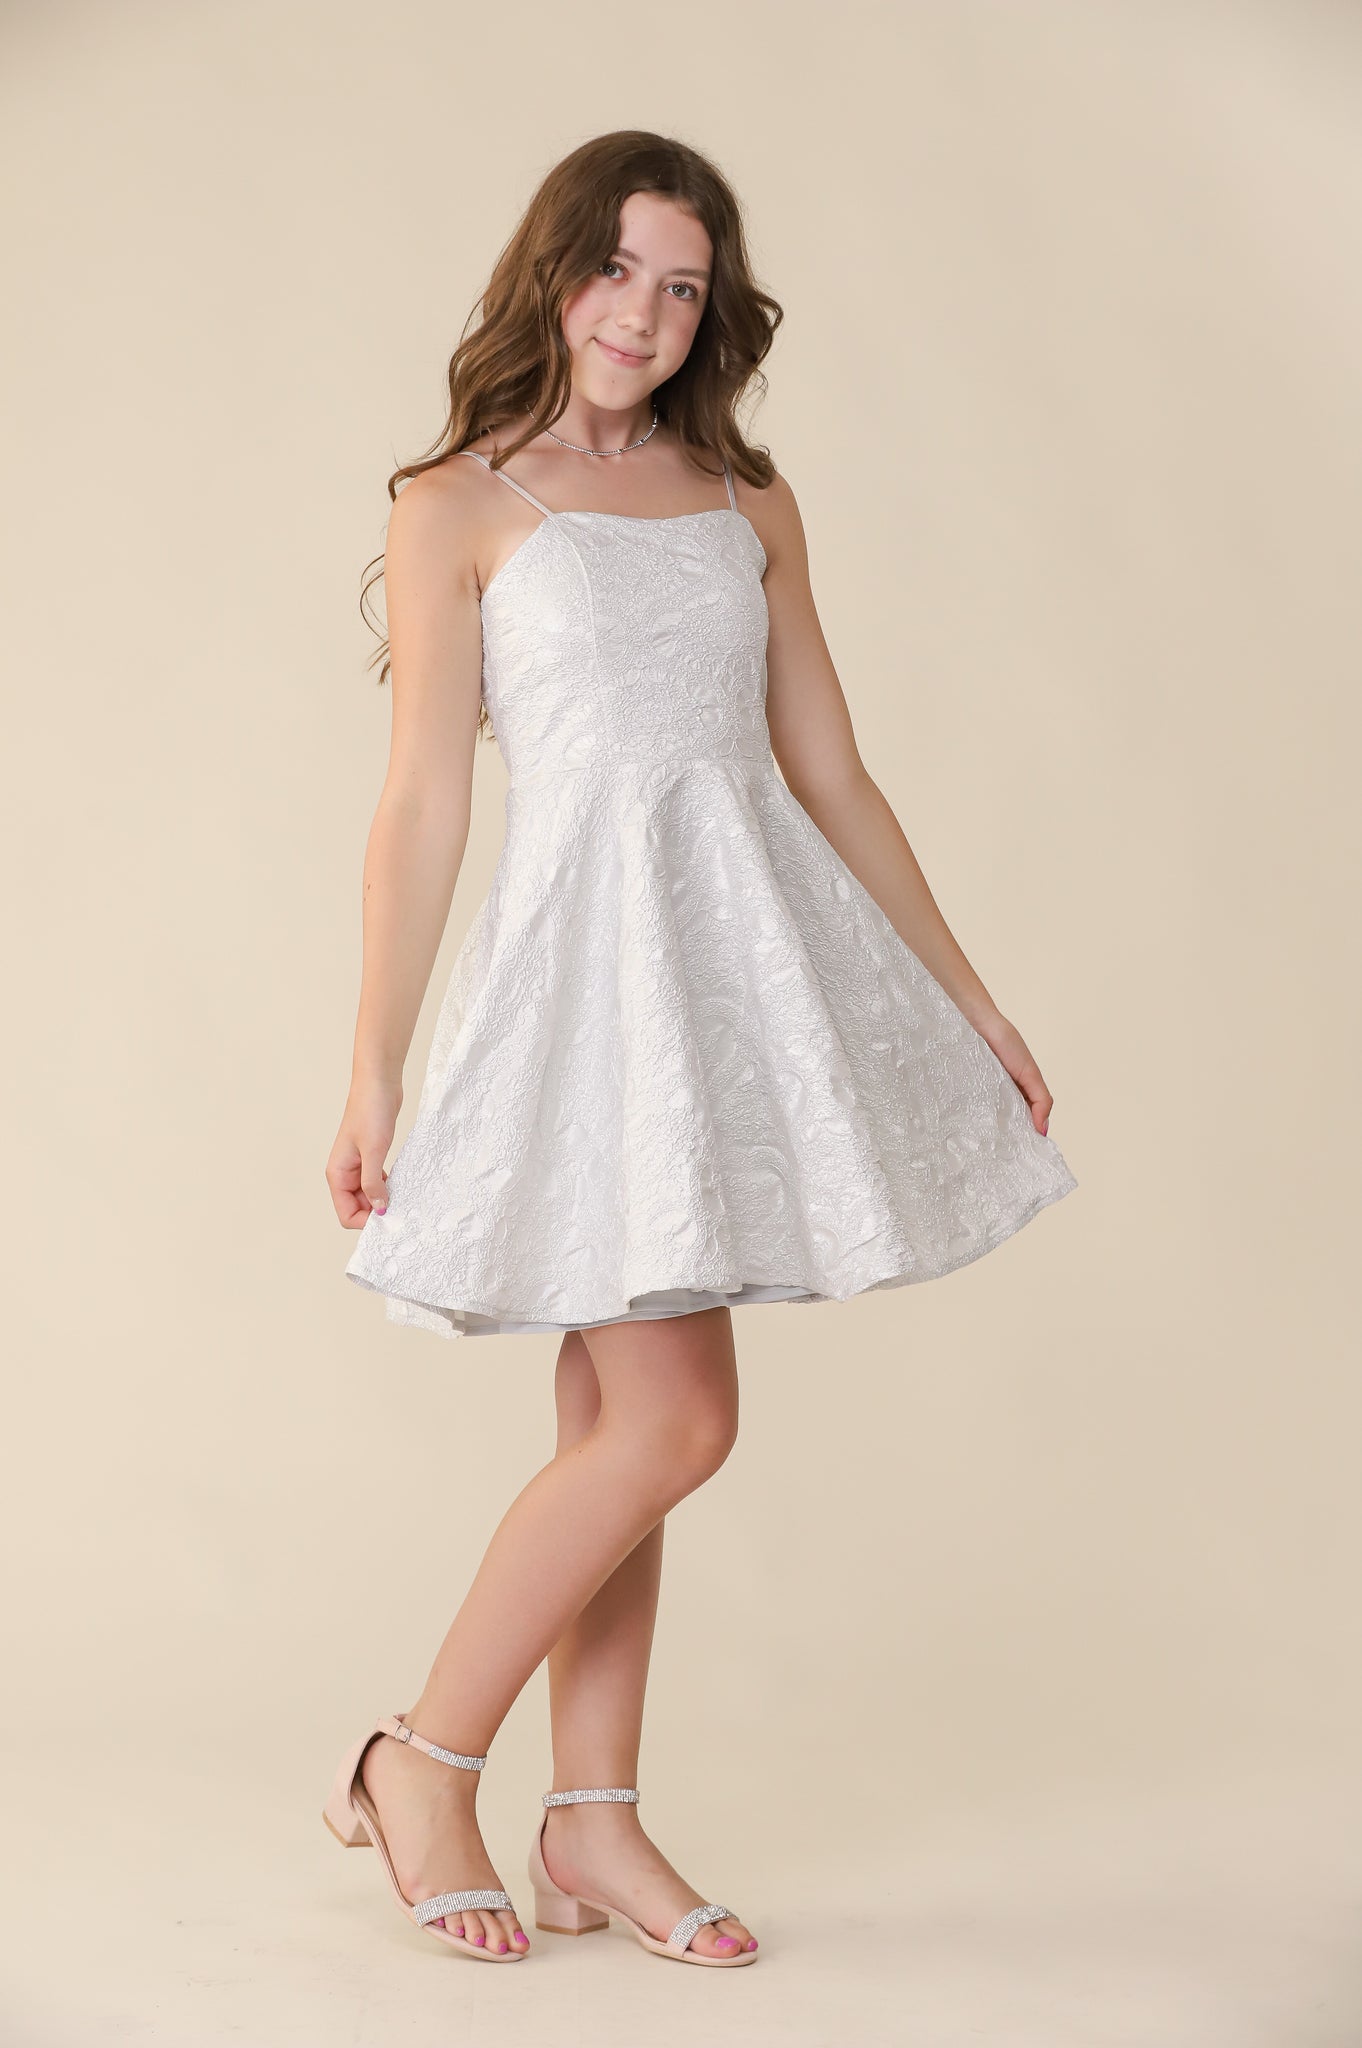 A young brown haired girl in the fit and flare silver and ivory dress that hits above the knee with a heel..